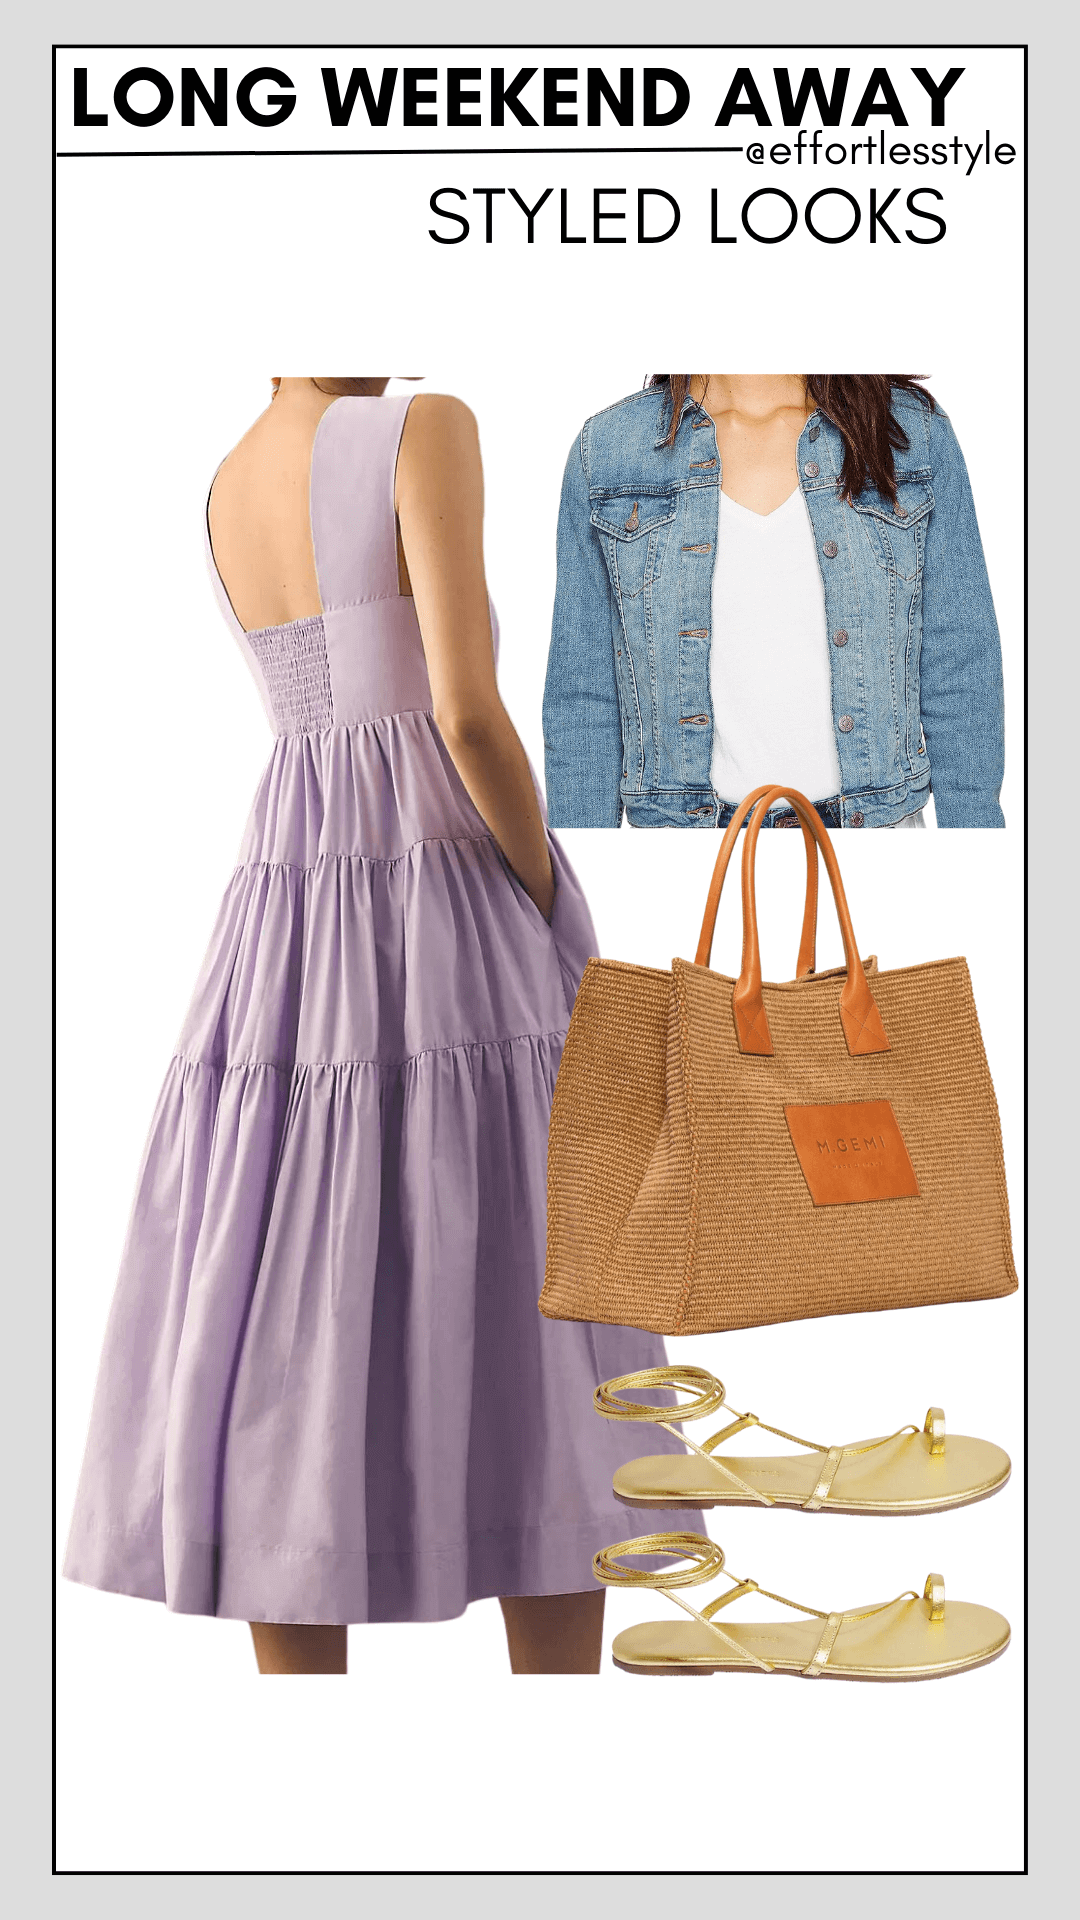 Square Neck Tiered Ruffle Midi Dress & Denim Jacket how to style a tiered ruffle maxi dress versatile dress for summer travel fun ways to style a midi dress how to wear your jean jacket this summer the best metallic sandals classic tote bag for summer